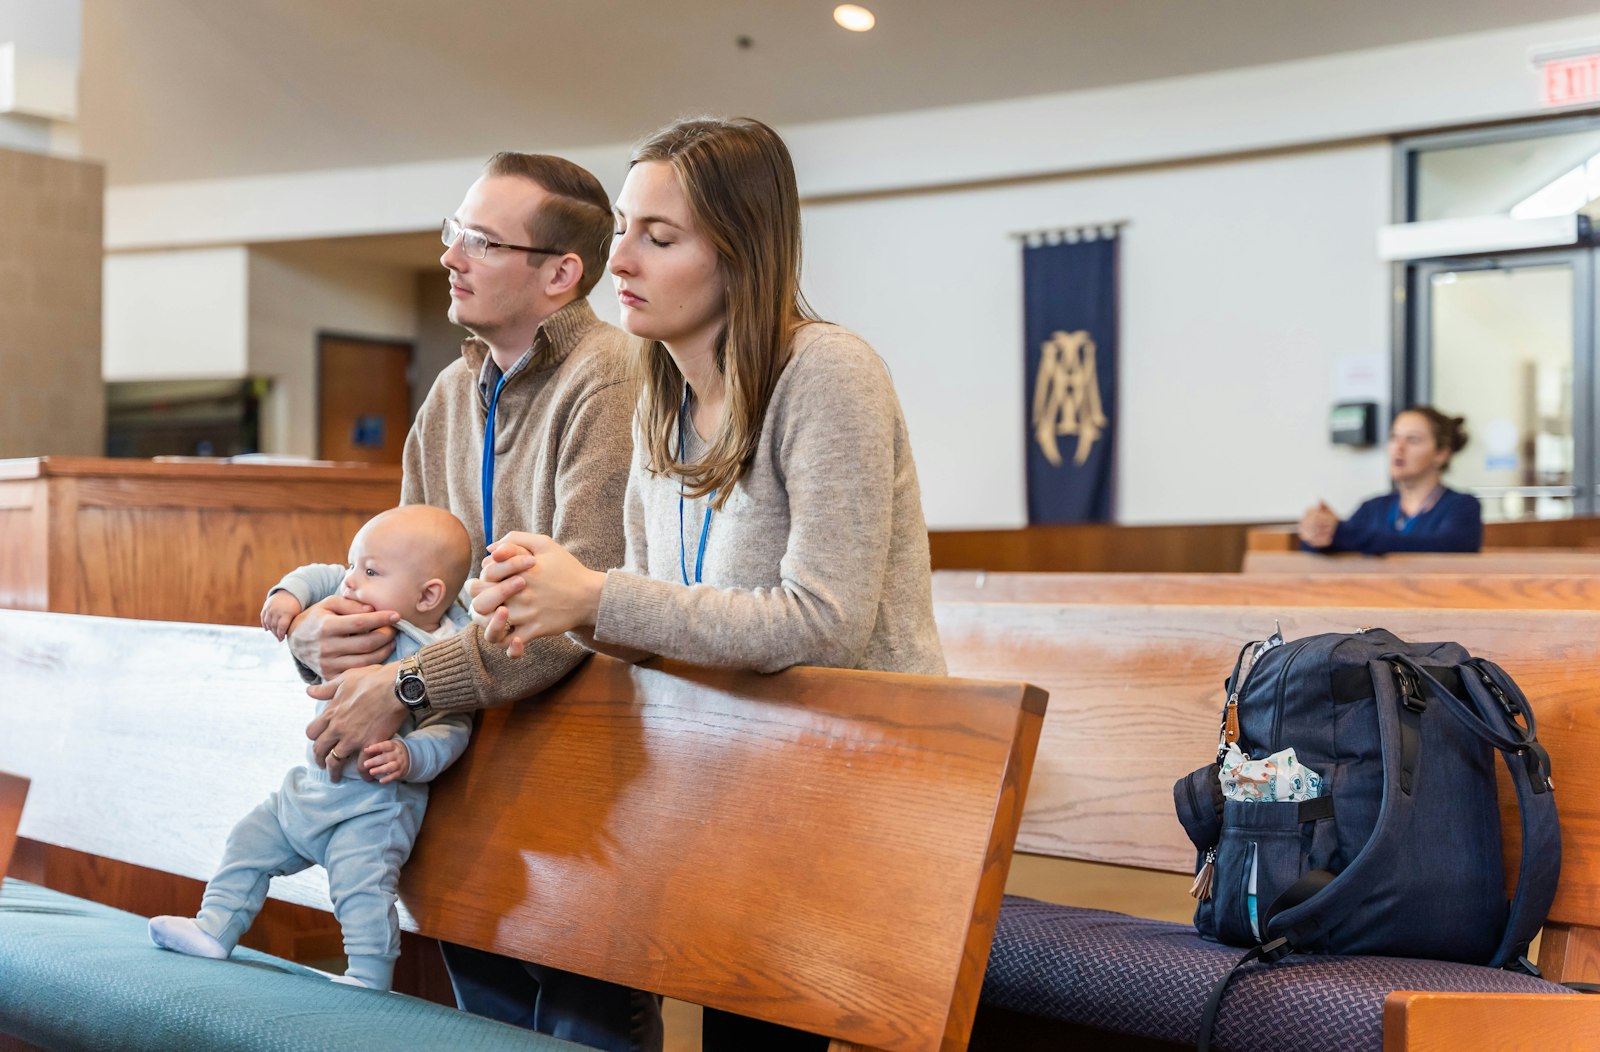 Paul and Andrea Spankie of St. Peter Parish in Mount Clemens pray as they hold their son, Theo, during Mass to begin the Together in Holiness conference Oct. 15 at Our Lady of Good Counsel Parish in Plymouth.